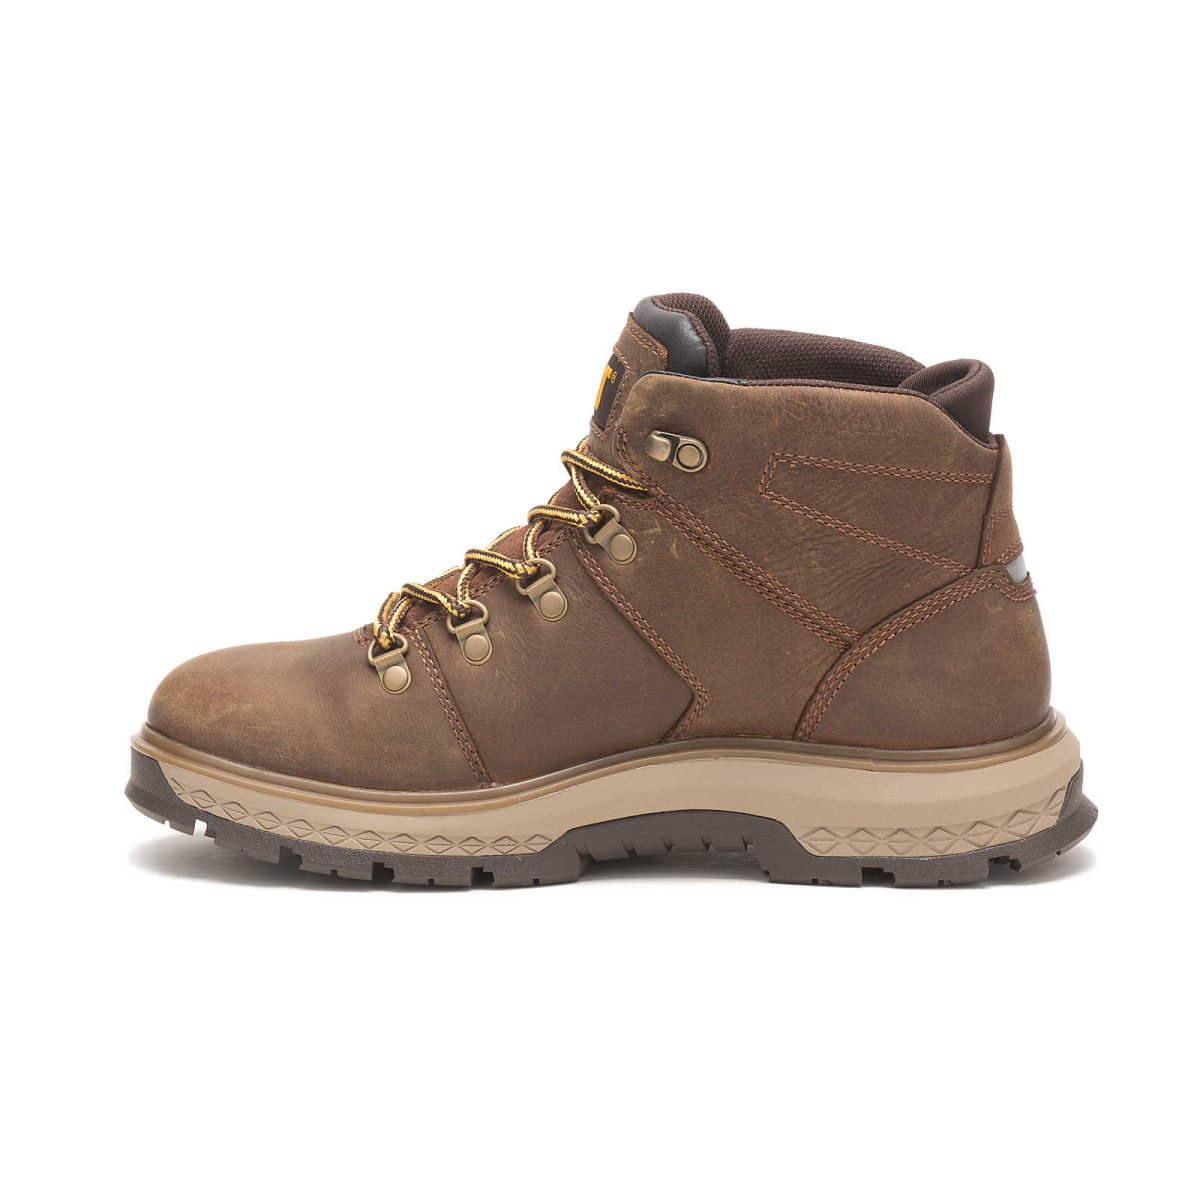 CATERPILLAR EXPOSITION HIKER WATERPROOF SOFT TOE MEN'S WORK BOOT (P51061) IN PYRAMID - TLW Shoes